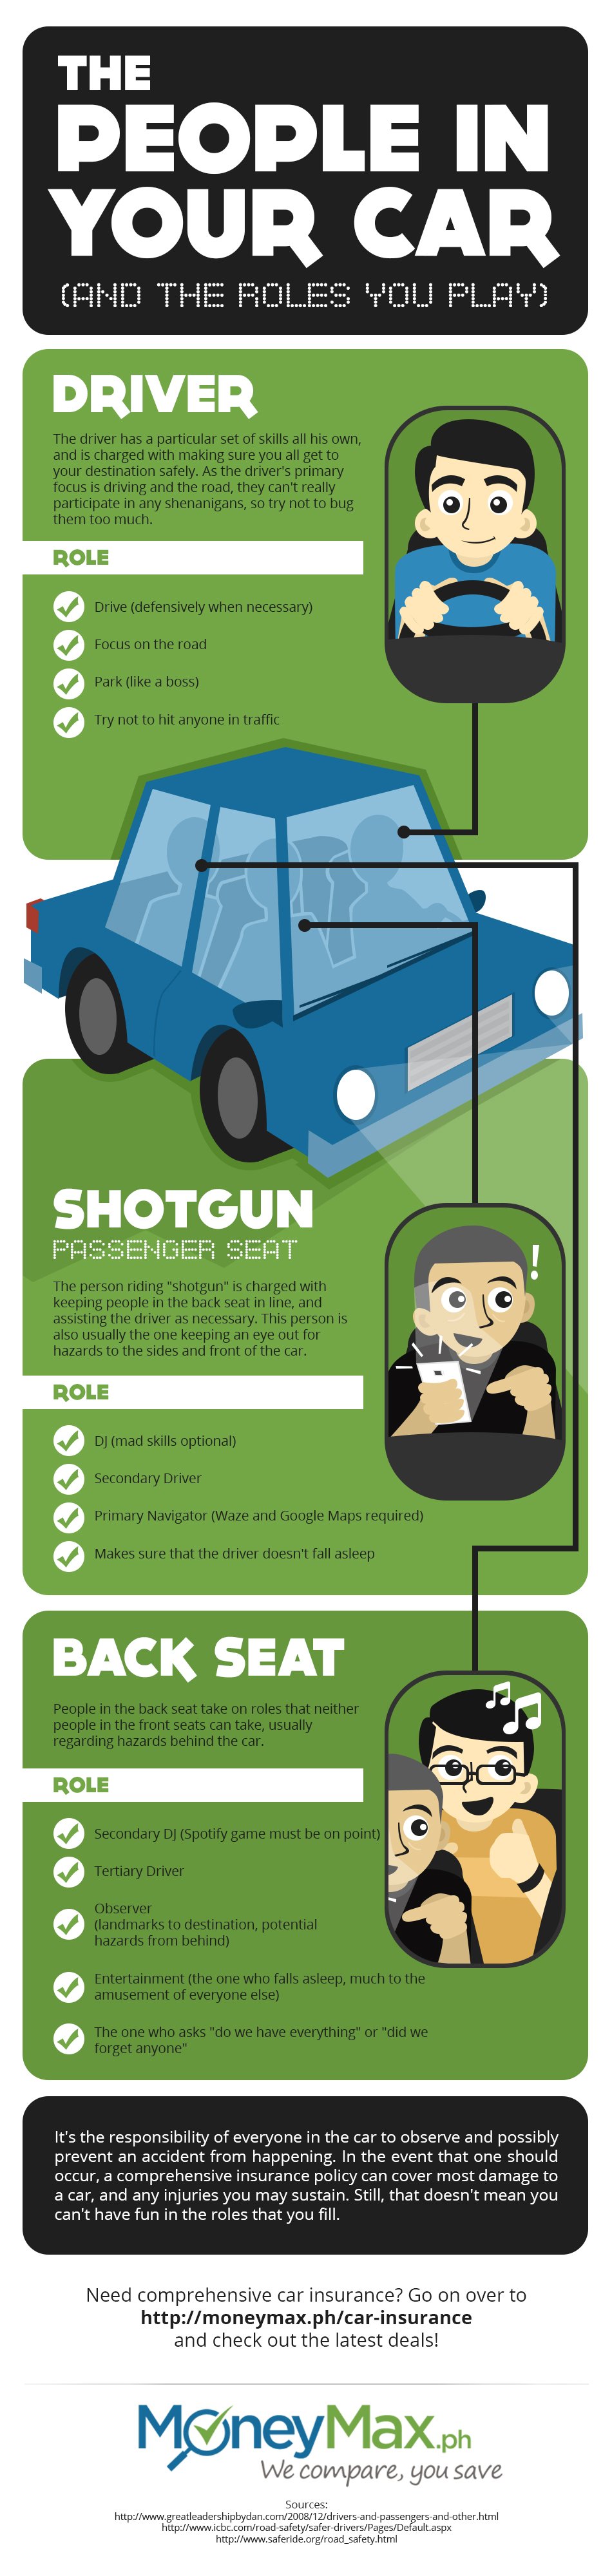 People in Your Car Infographic